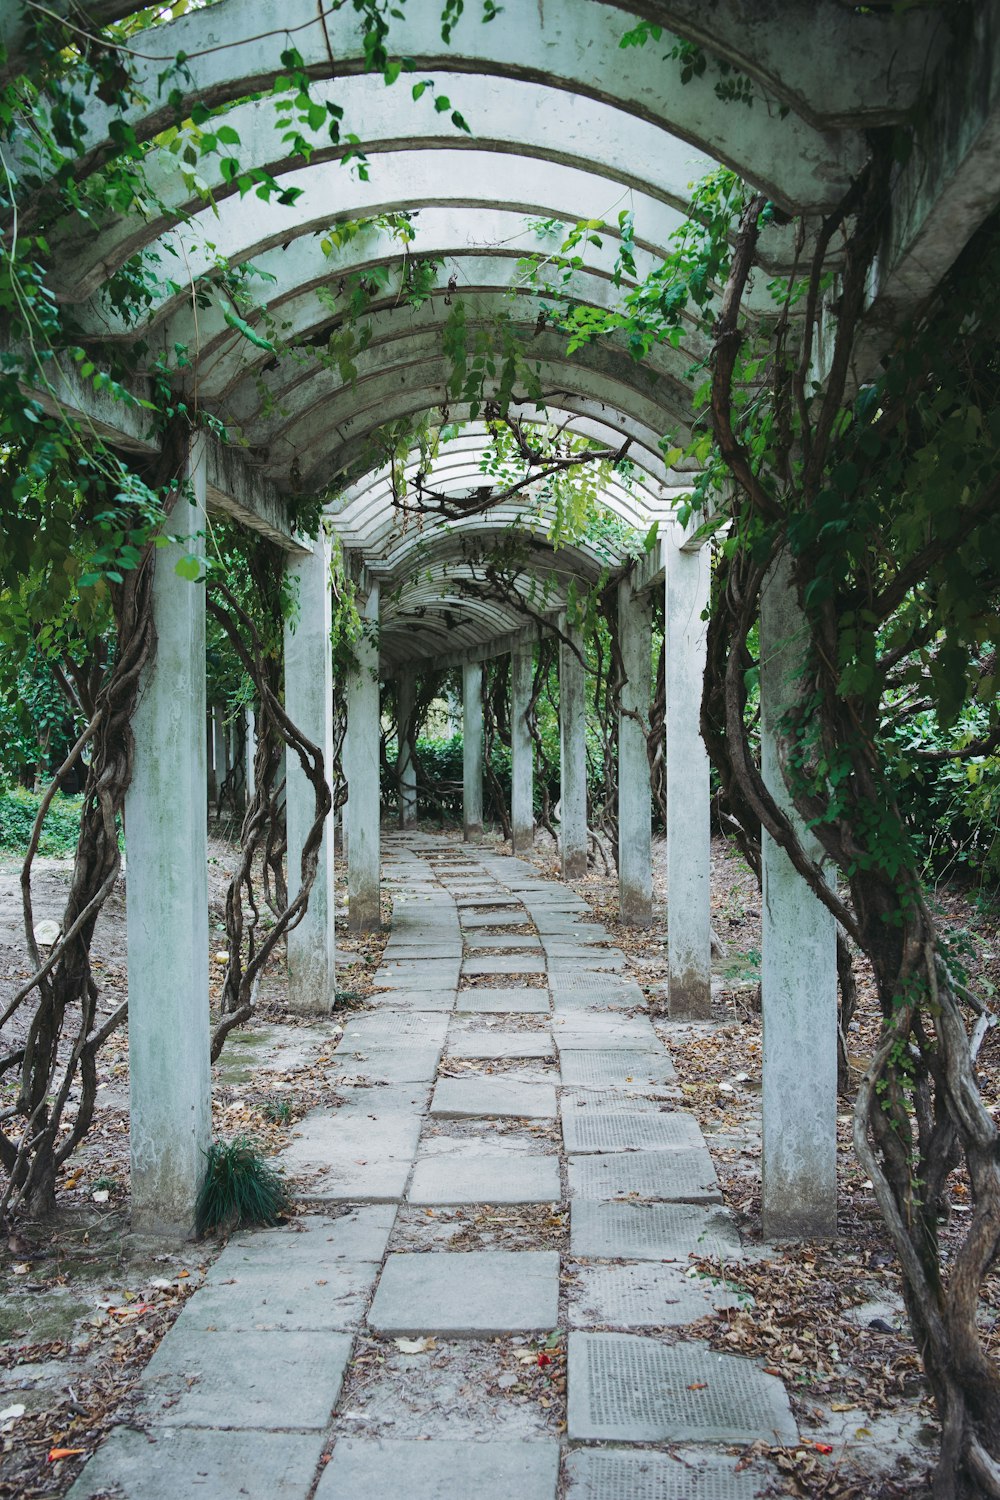 a stone walkway surrounded by vines and trees